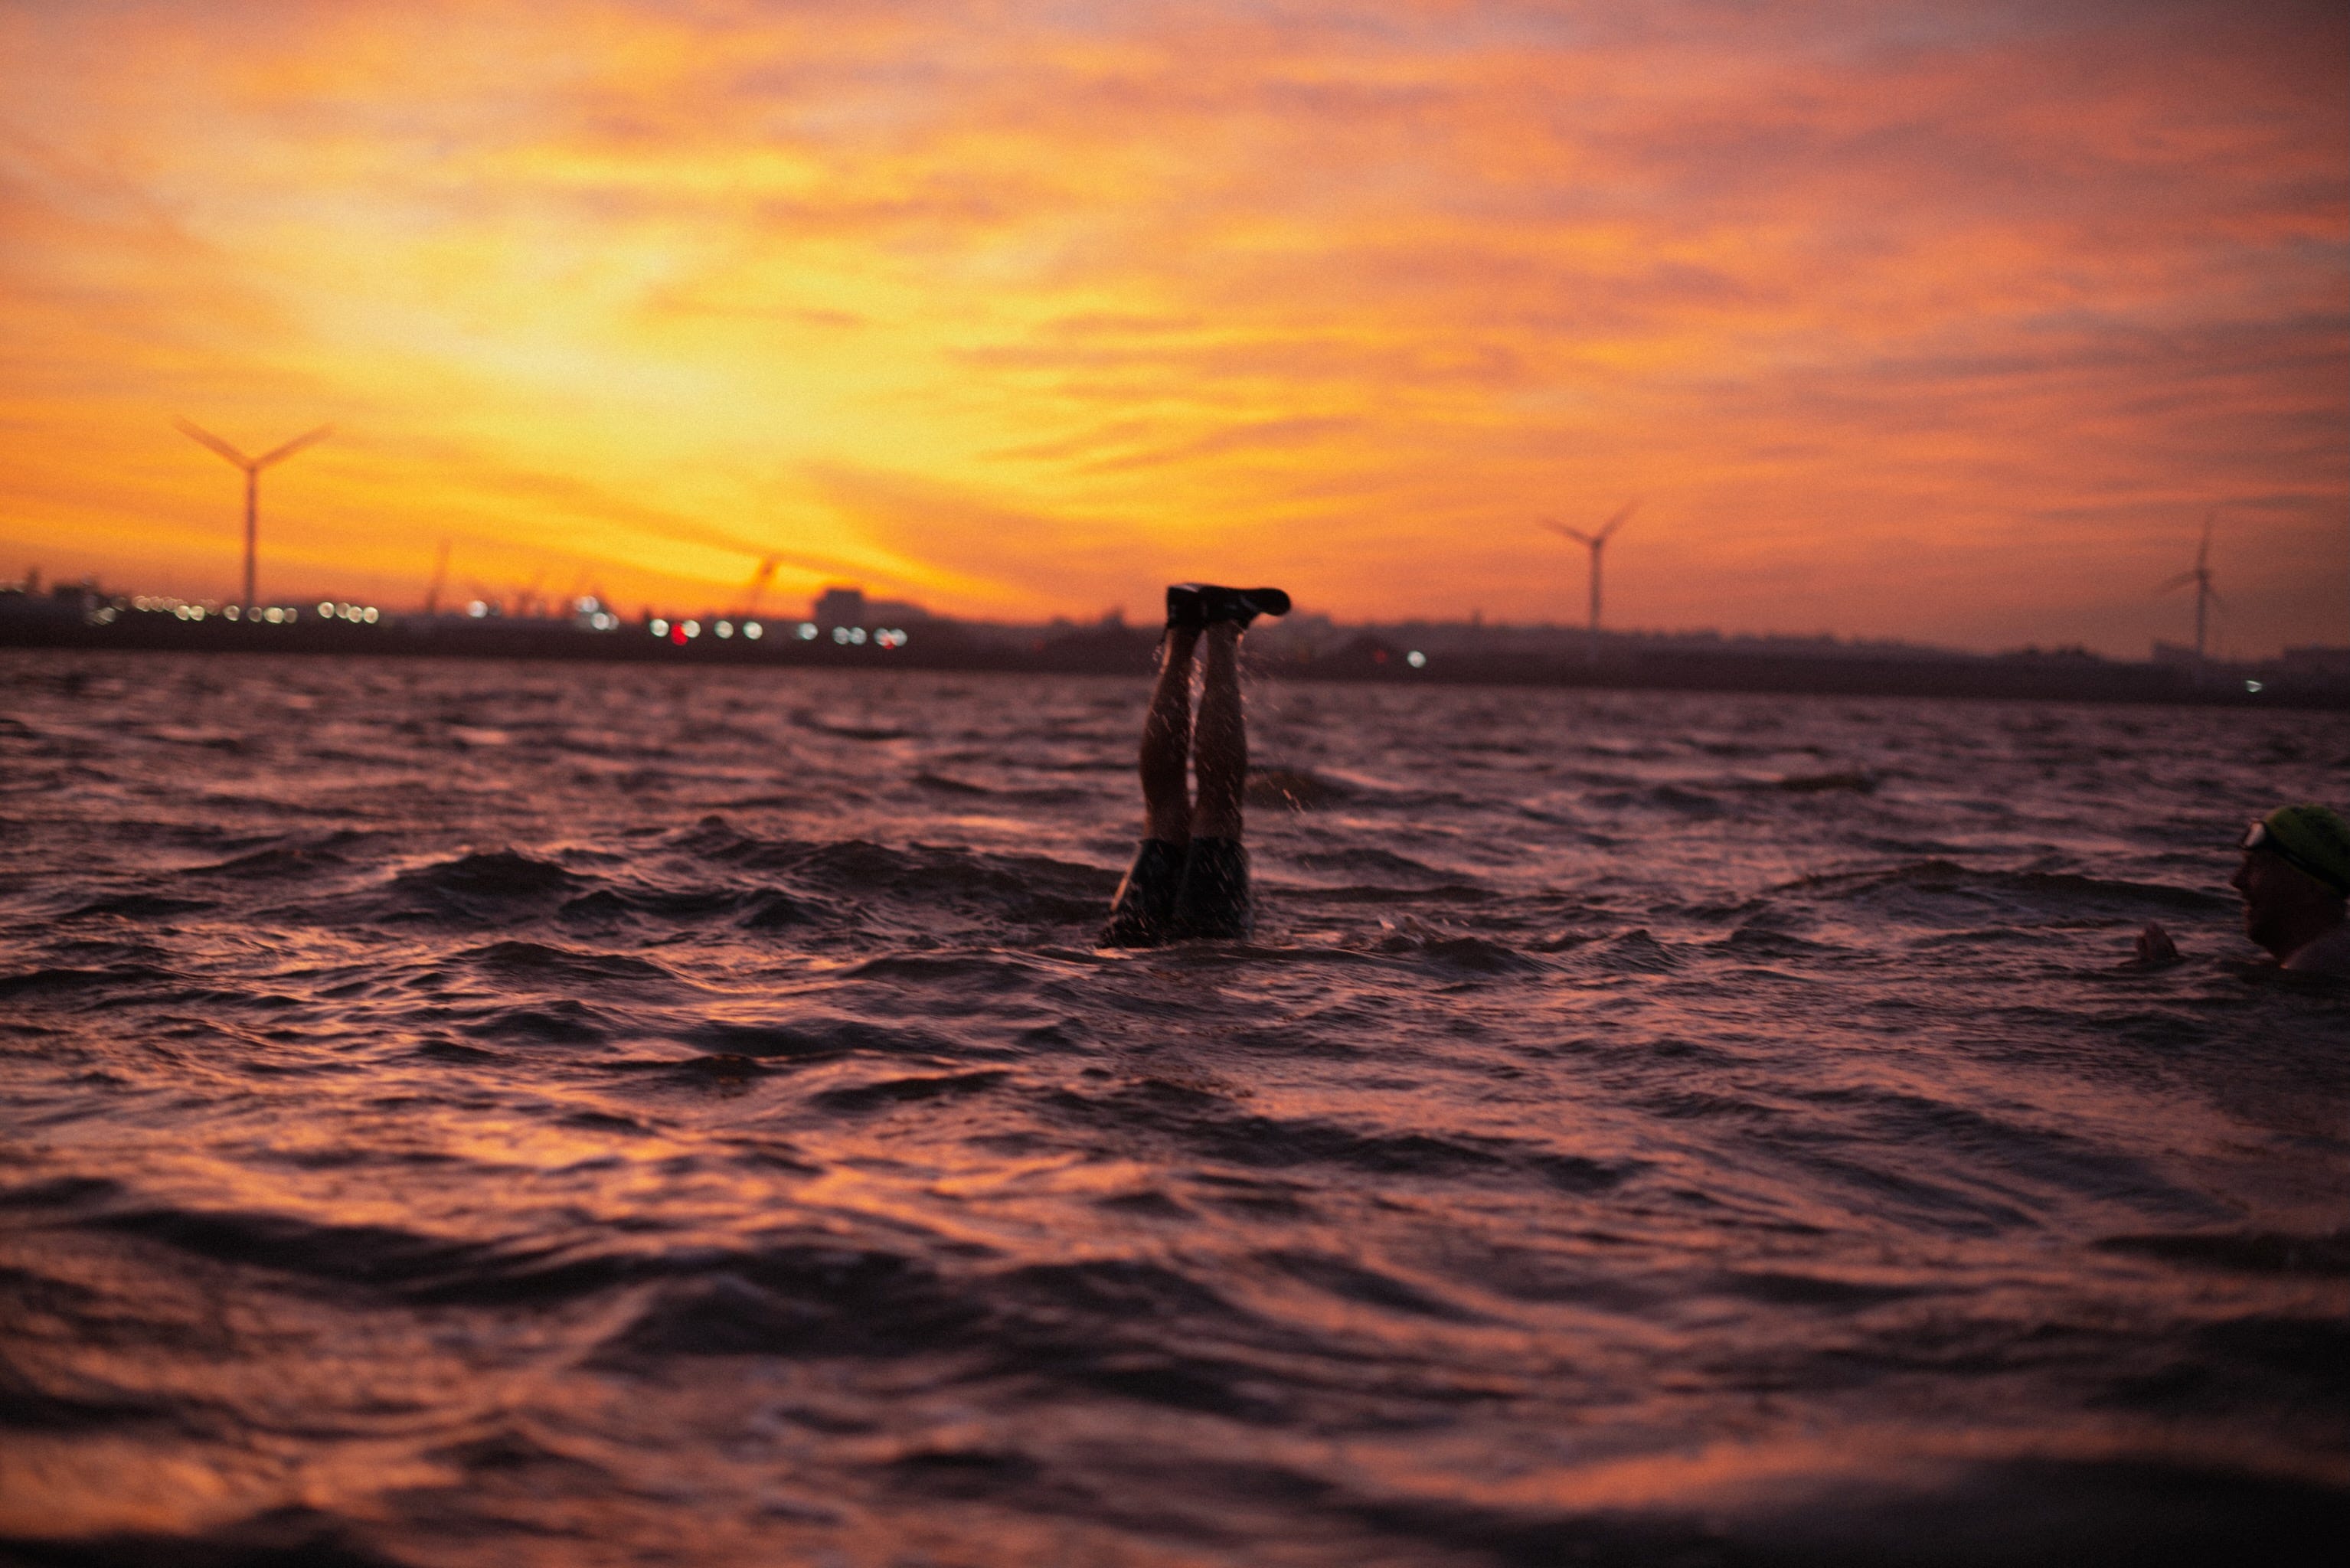 A man does a handstand in the River Mersey at sunrise. Only his legs are visible.